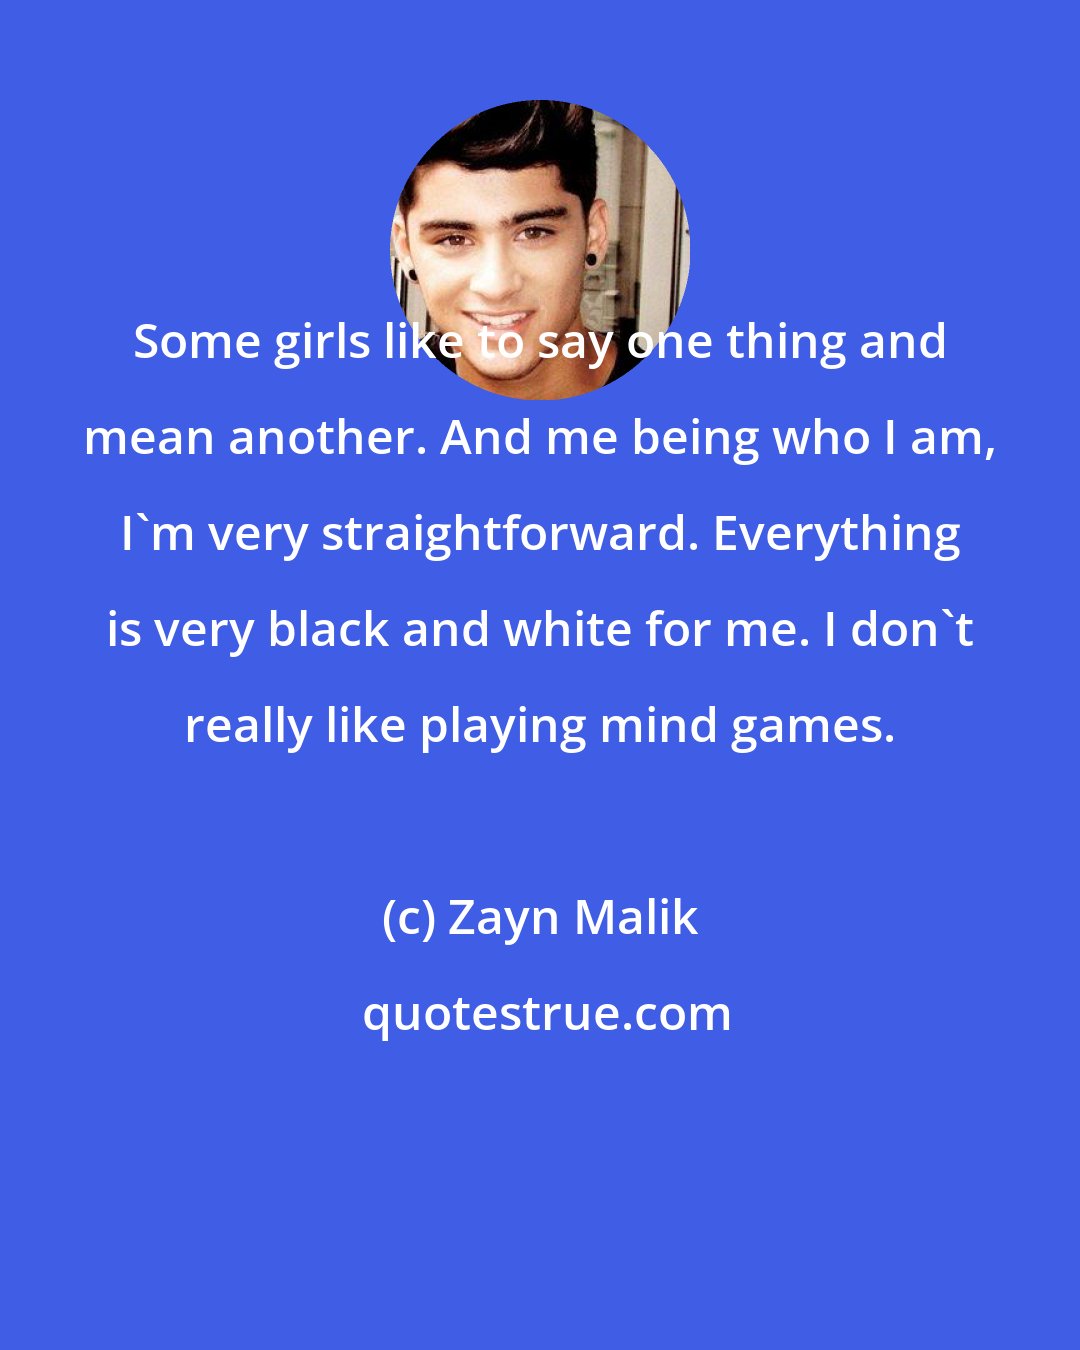 Zayn Malik: Some girls like to say one thing and mean another. And me being who I am, I'm very straightforward. Everything is very black and white for me. I don't really like playing mind games.